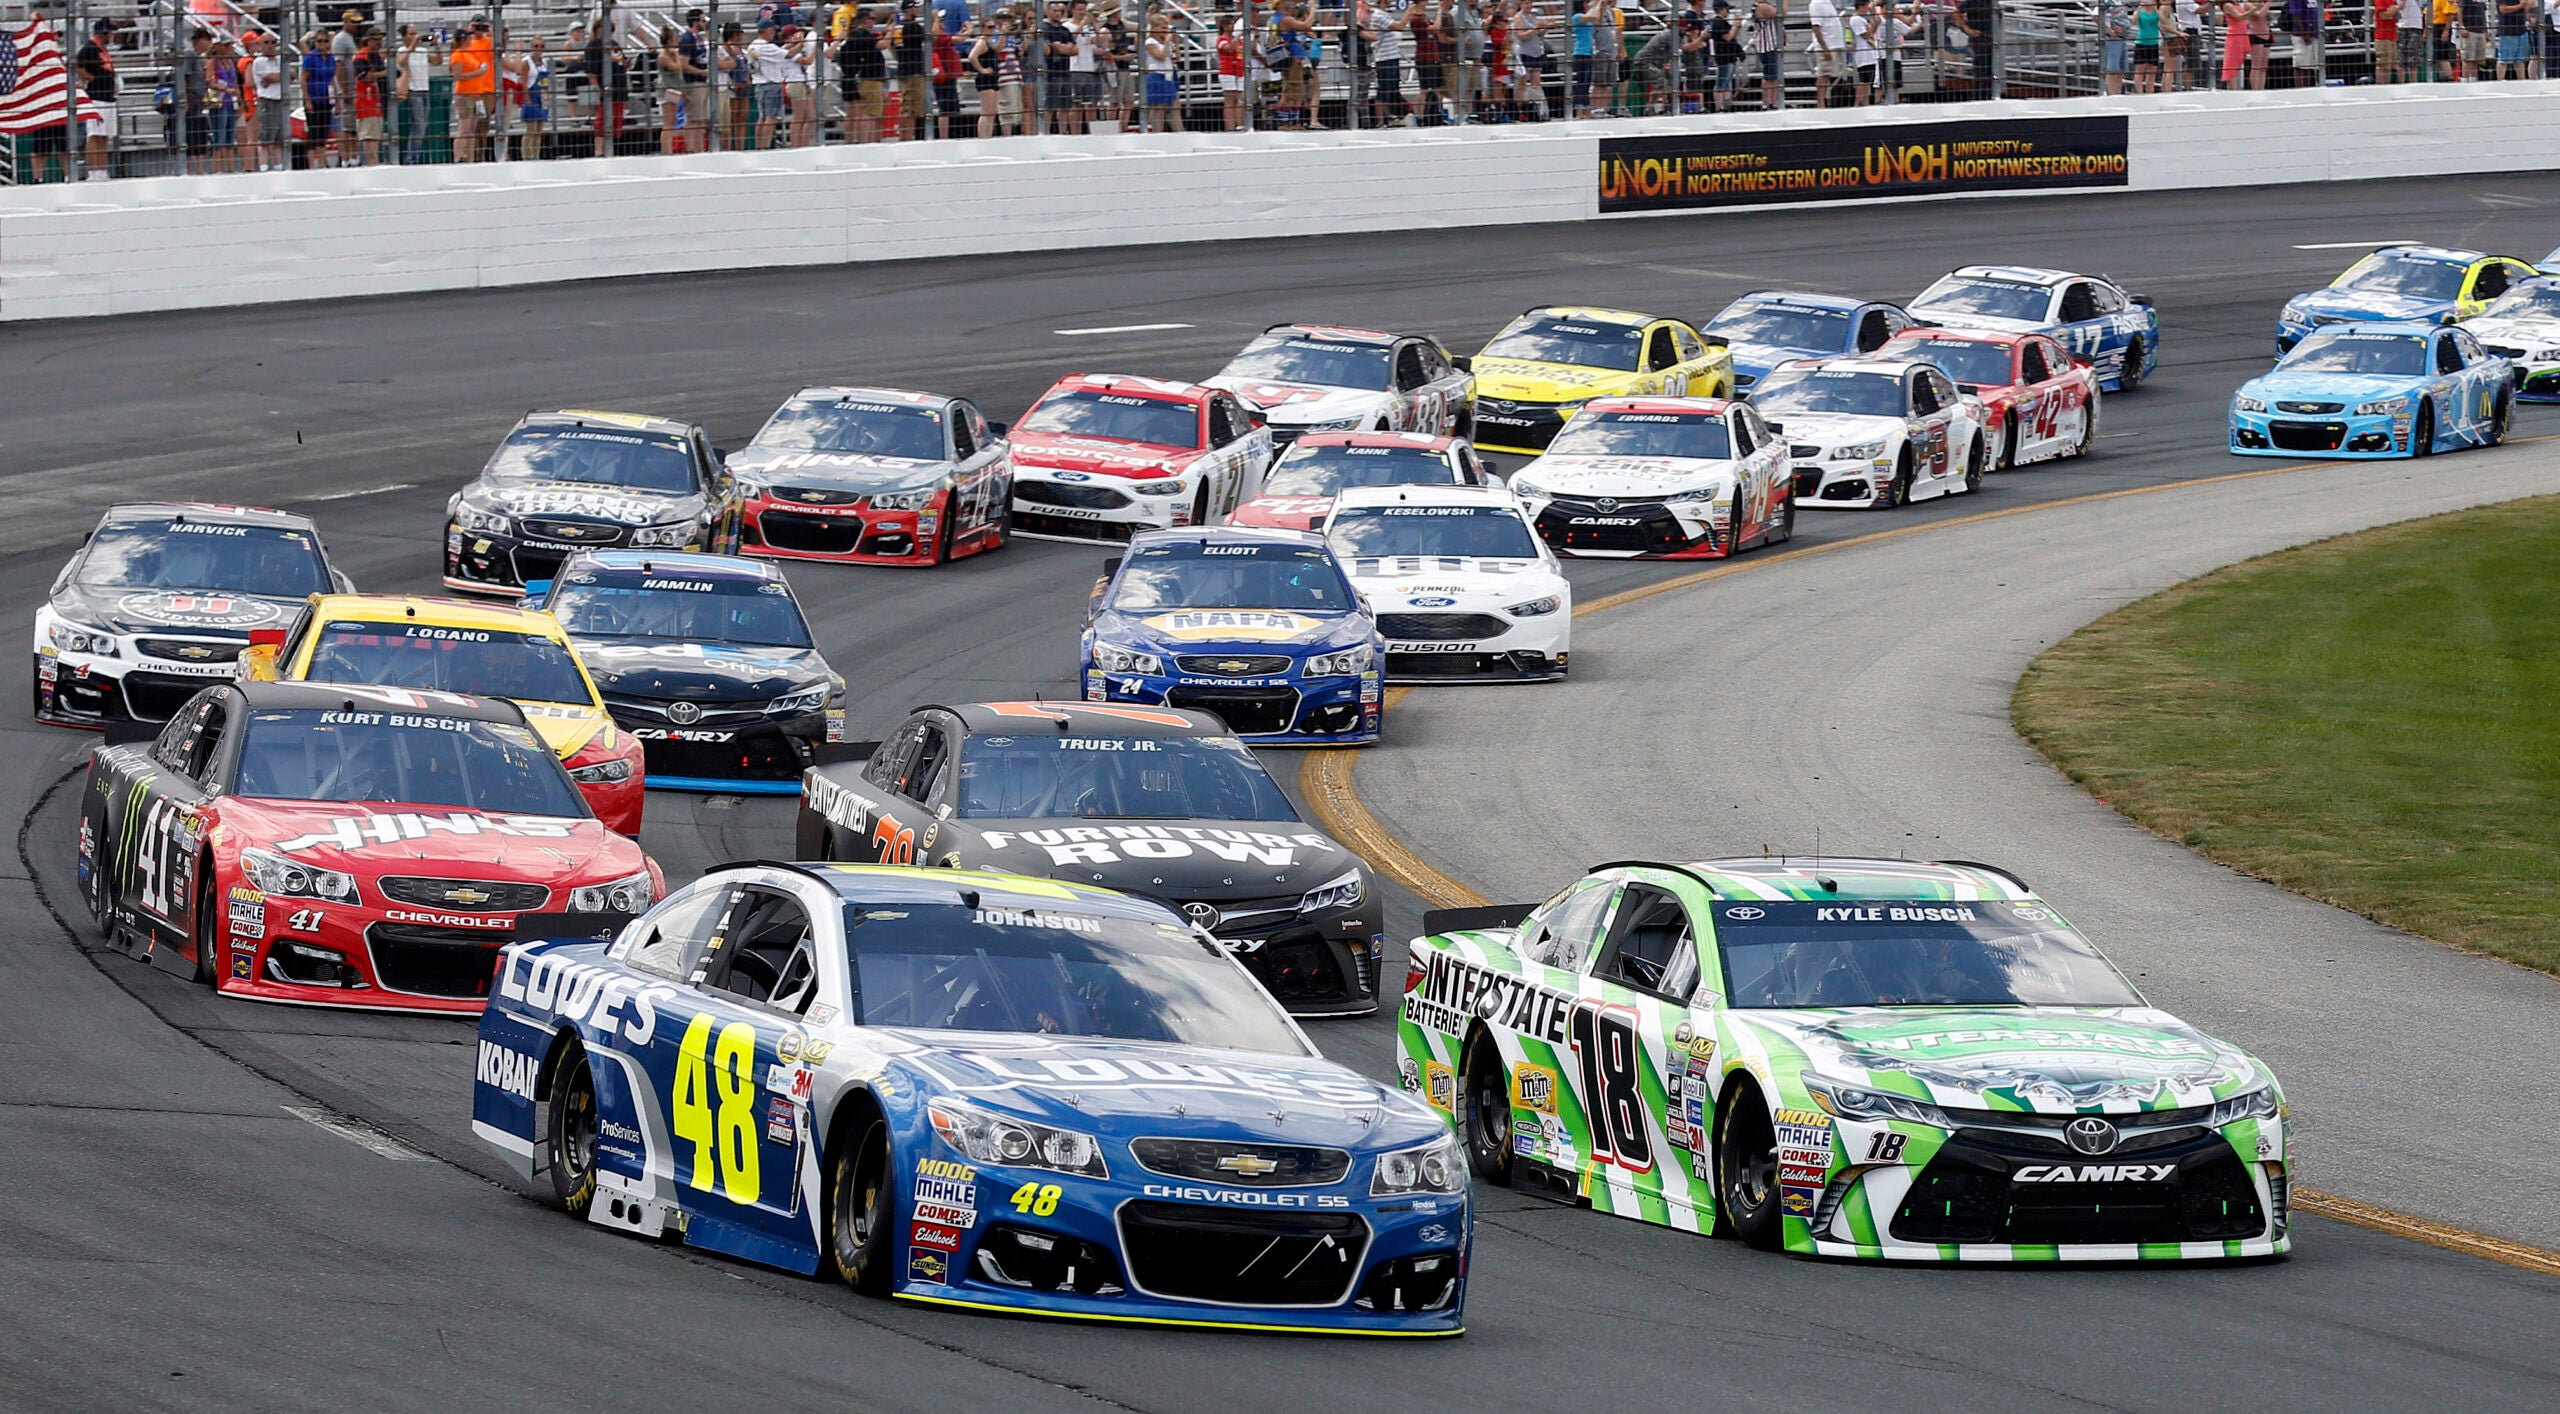 This New England NASCAR track is among the best in the country, according to USA Today readers